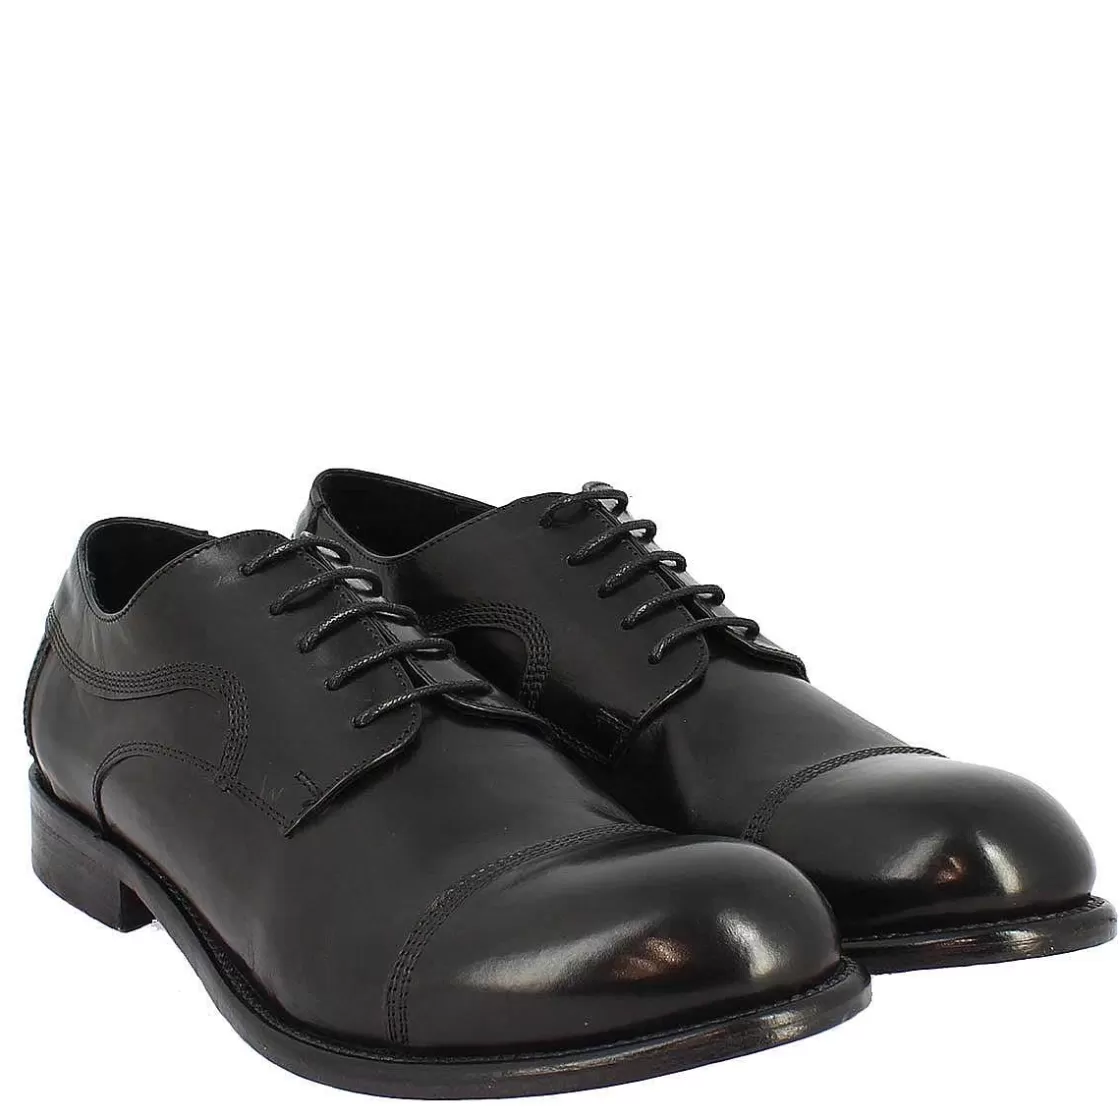 Leonardo Men'S Handmade Formal Lace-Up Shoes In Black Calf Leather Clearance